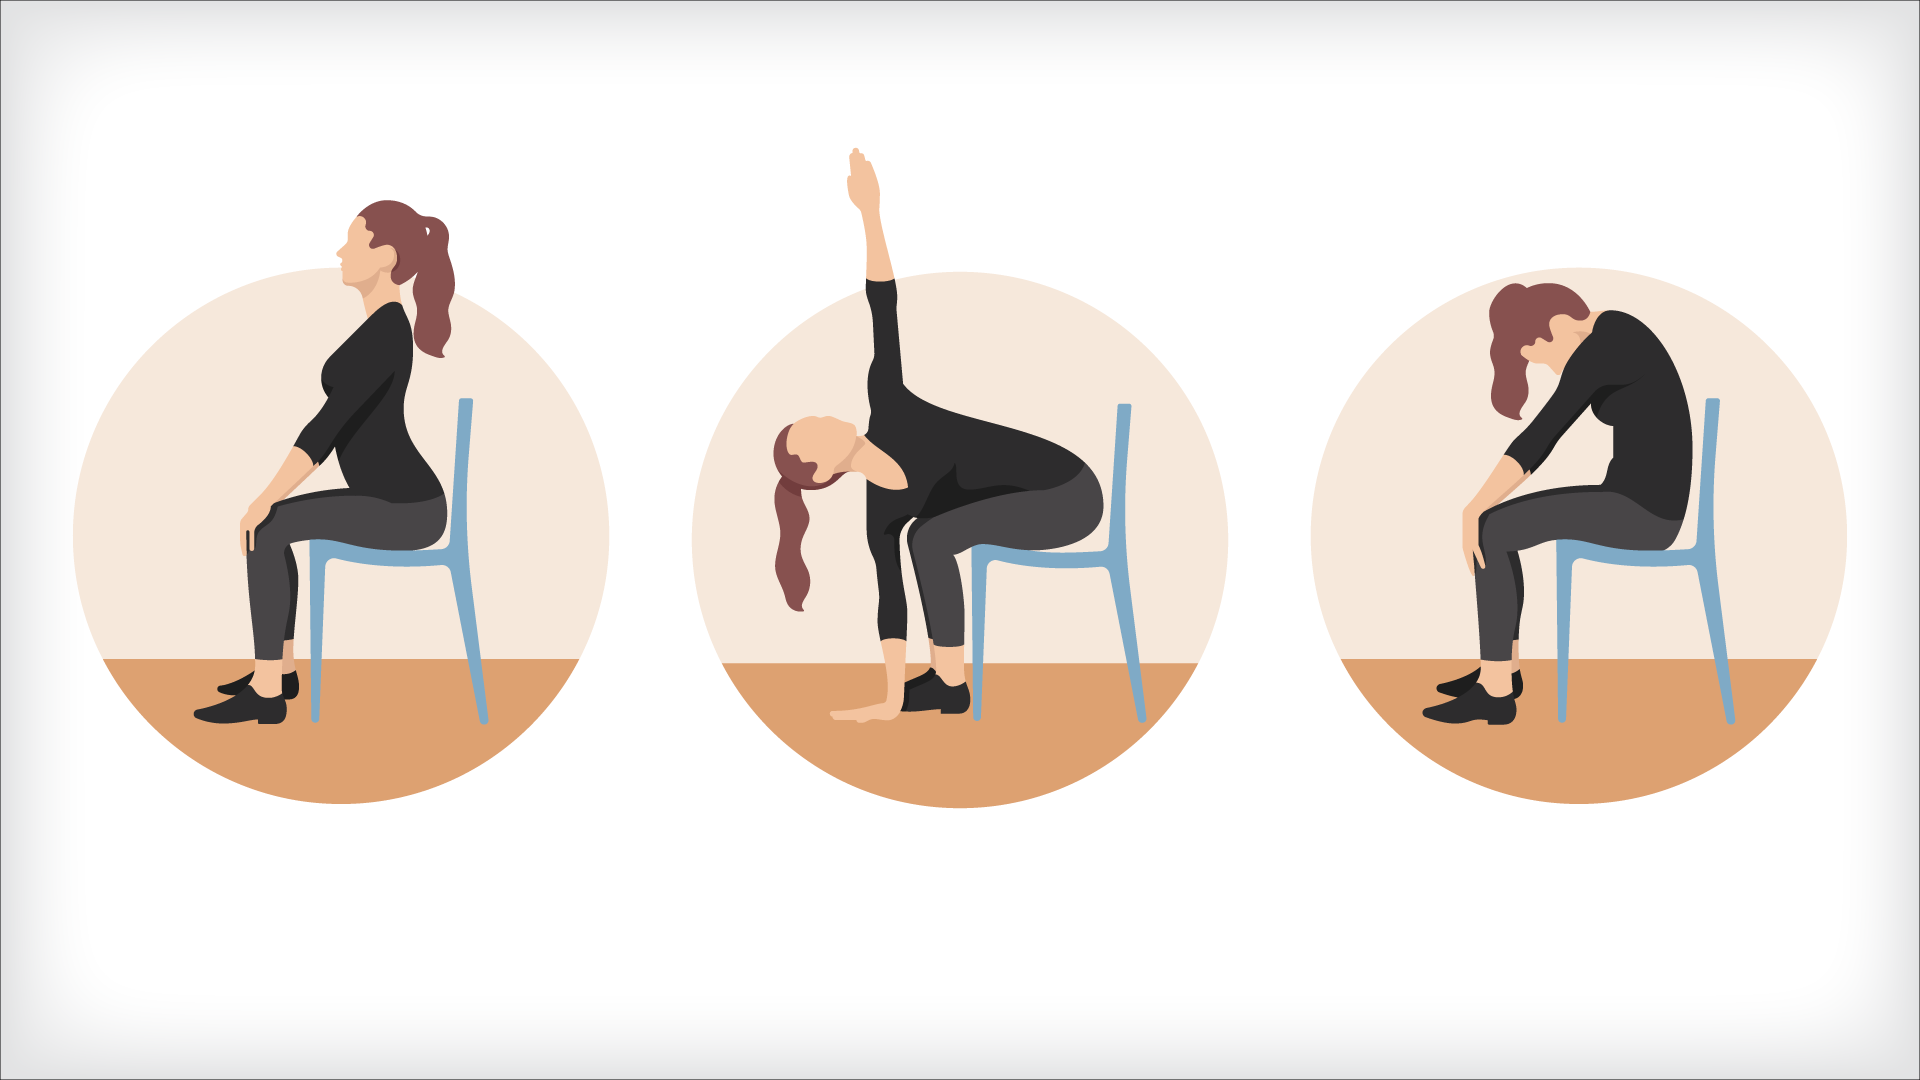 https://www.mondaycampaigns.org/wp-content/uploads/2021/05/destress-monday-feature-chair-yoga-1.png